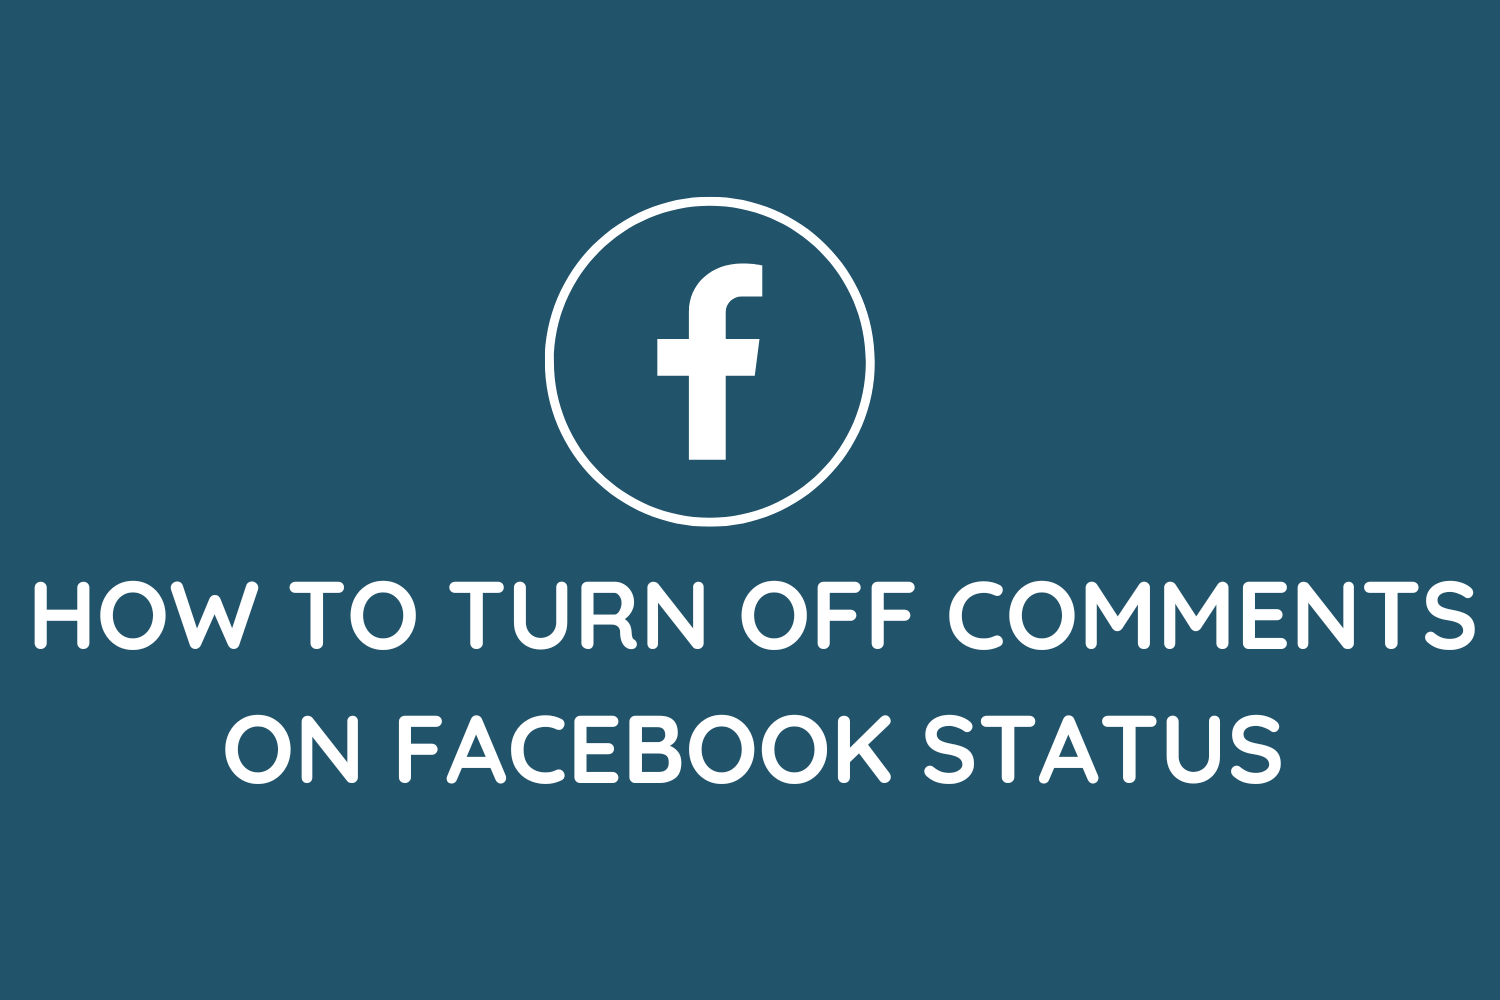 "How To Turn Off Comments On Facebook Status "